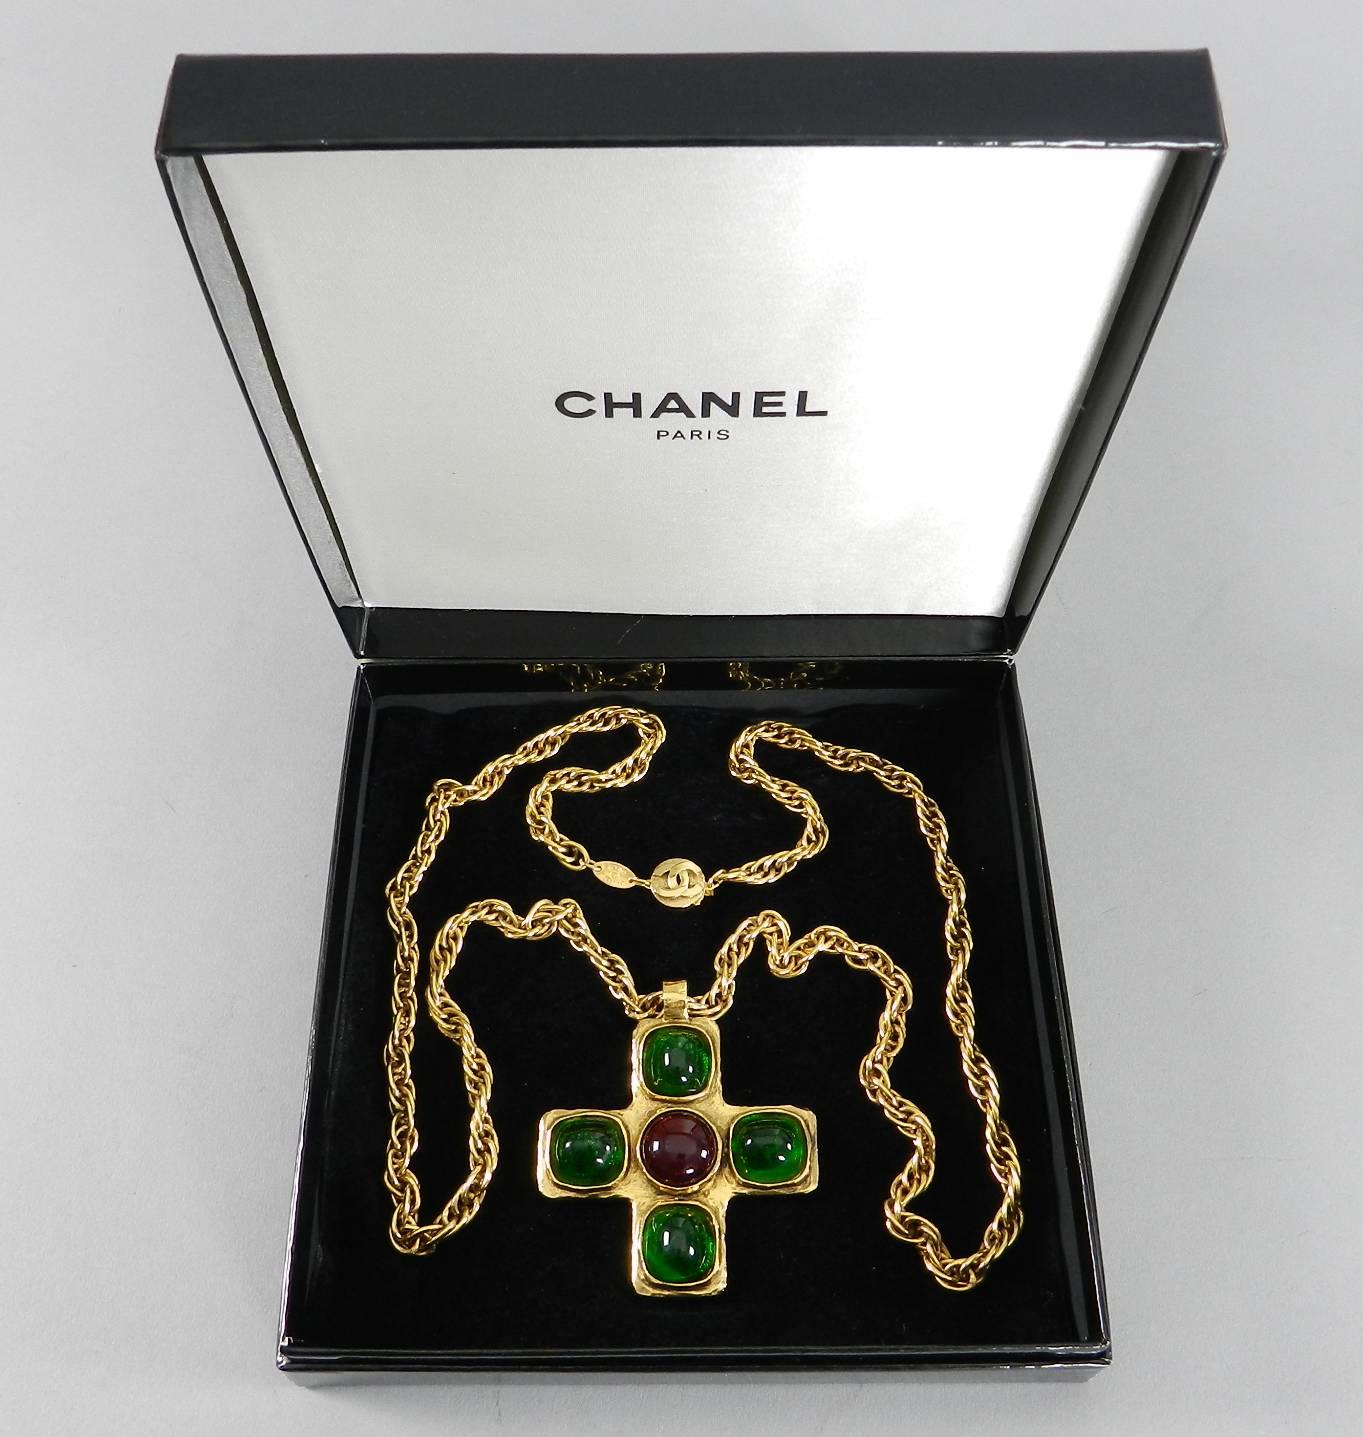 Chanel vintage dated 1982 Gripoix glass cross necklace in original box. Green and red glass with a CC logo clasp. The necklace has a 17